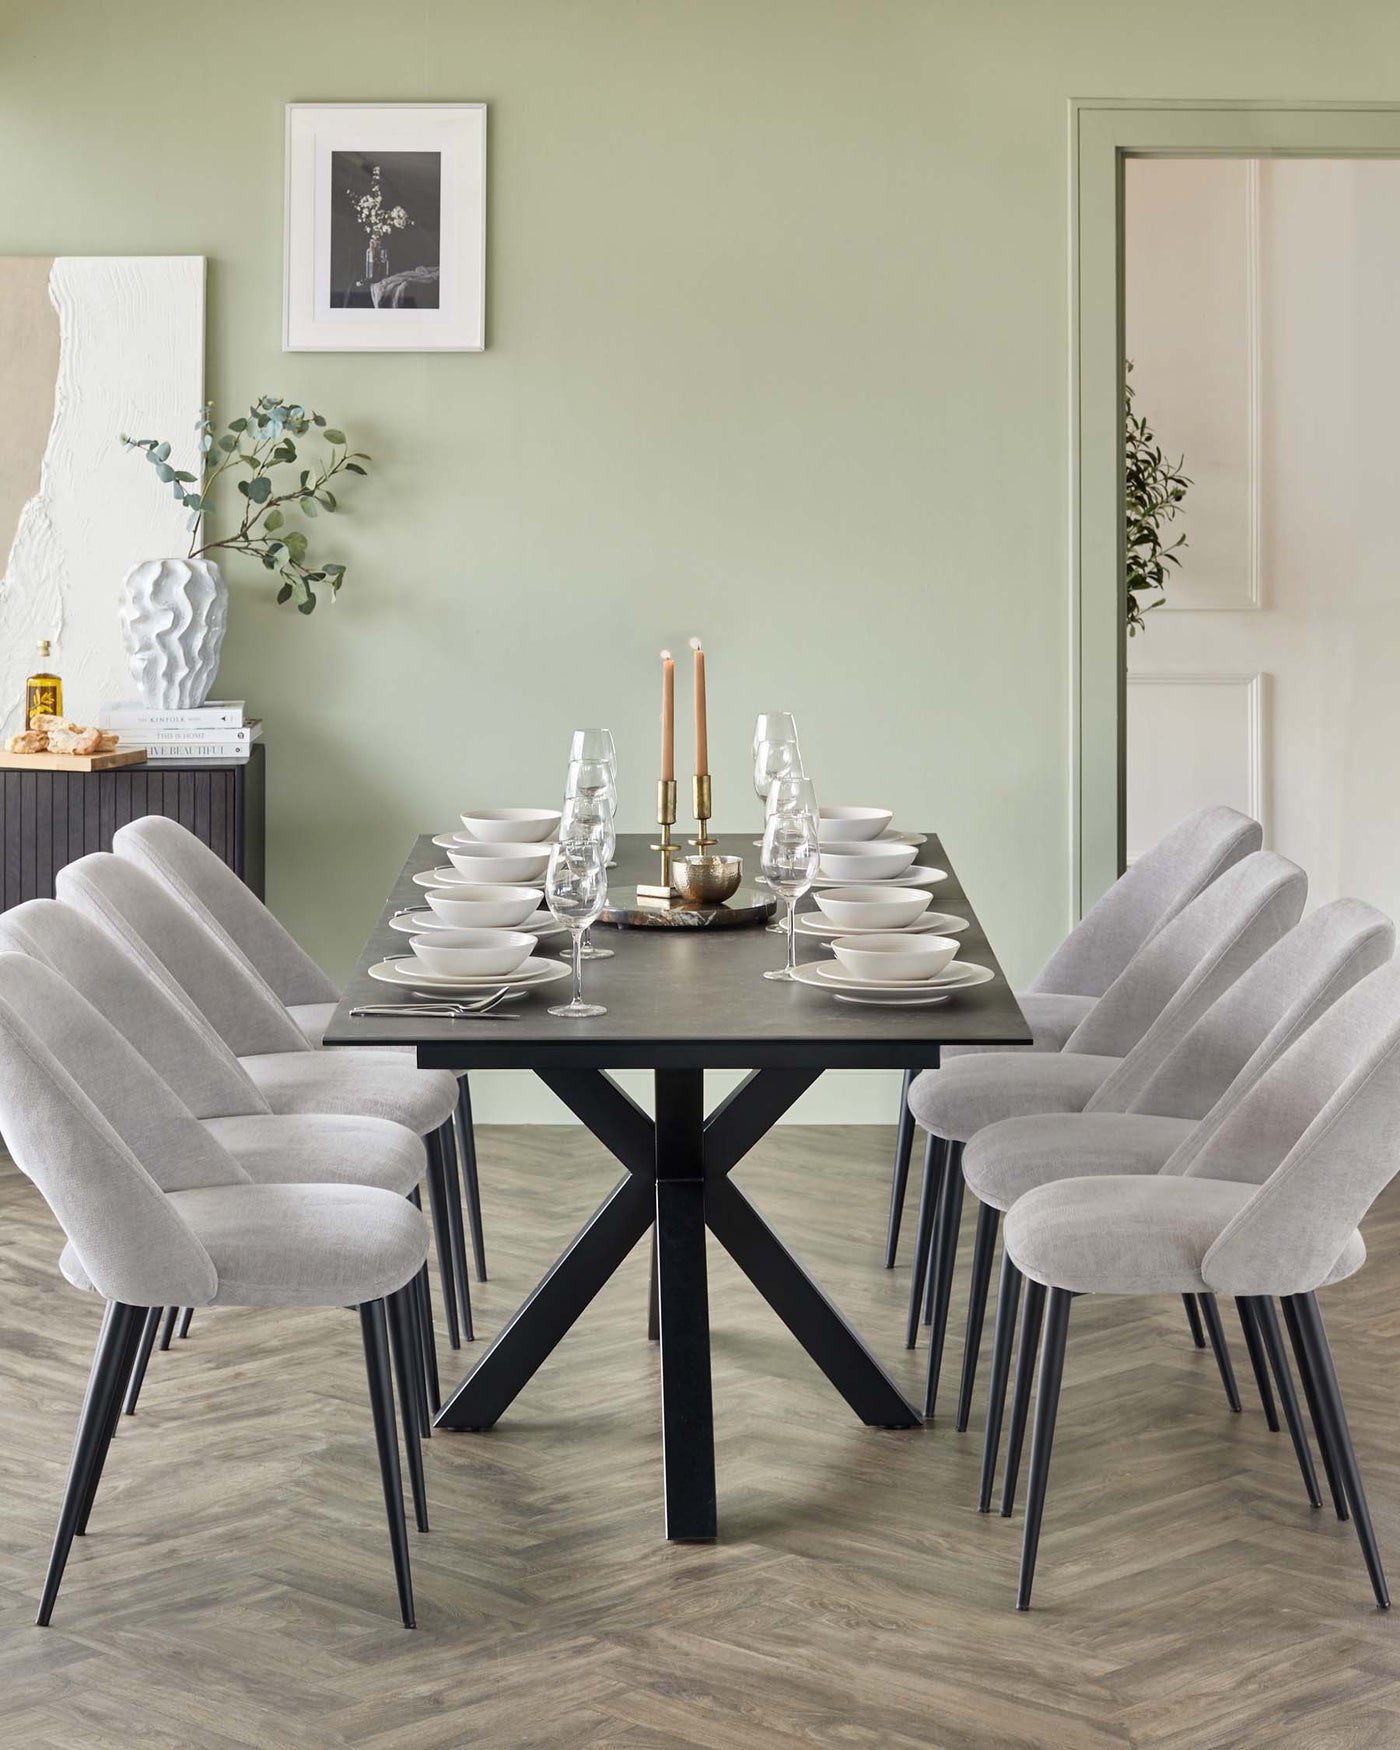 Modern dining set featuring a large rectangular black table with a X-shaped support base and six plush grey upholstered chairs with black legs positioned on a wooden floor. The table is set with white dishes, clear stemware, and a centrepiece with two tall candles.